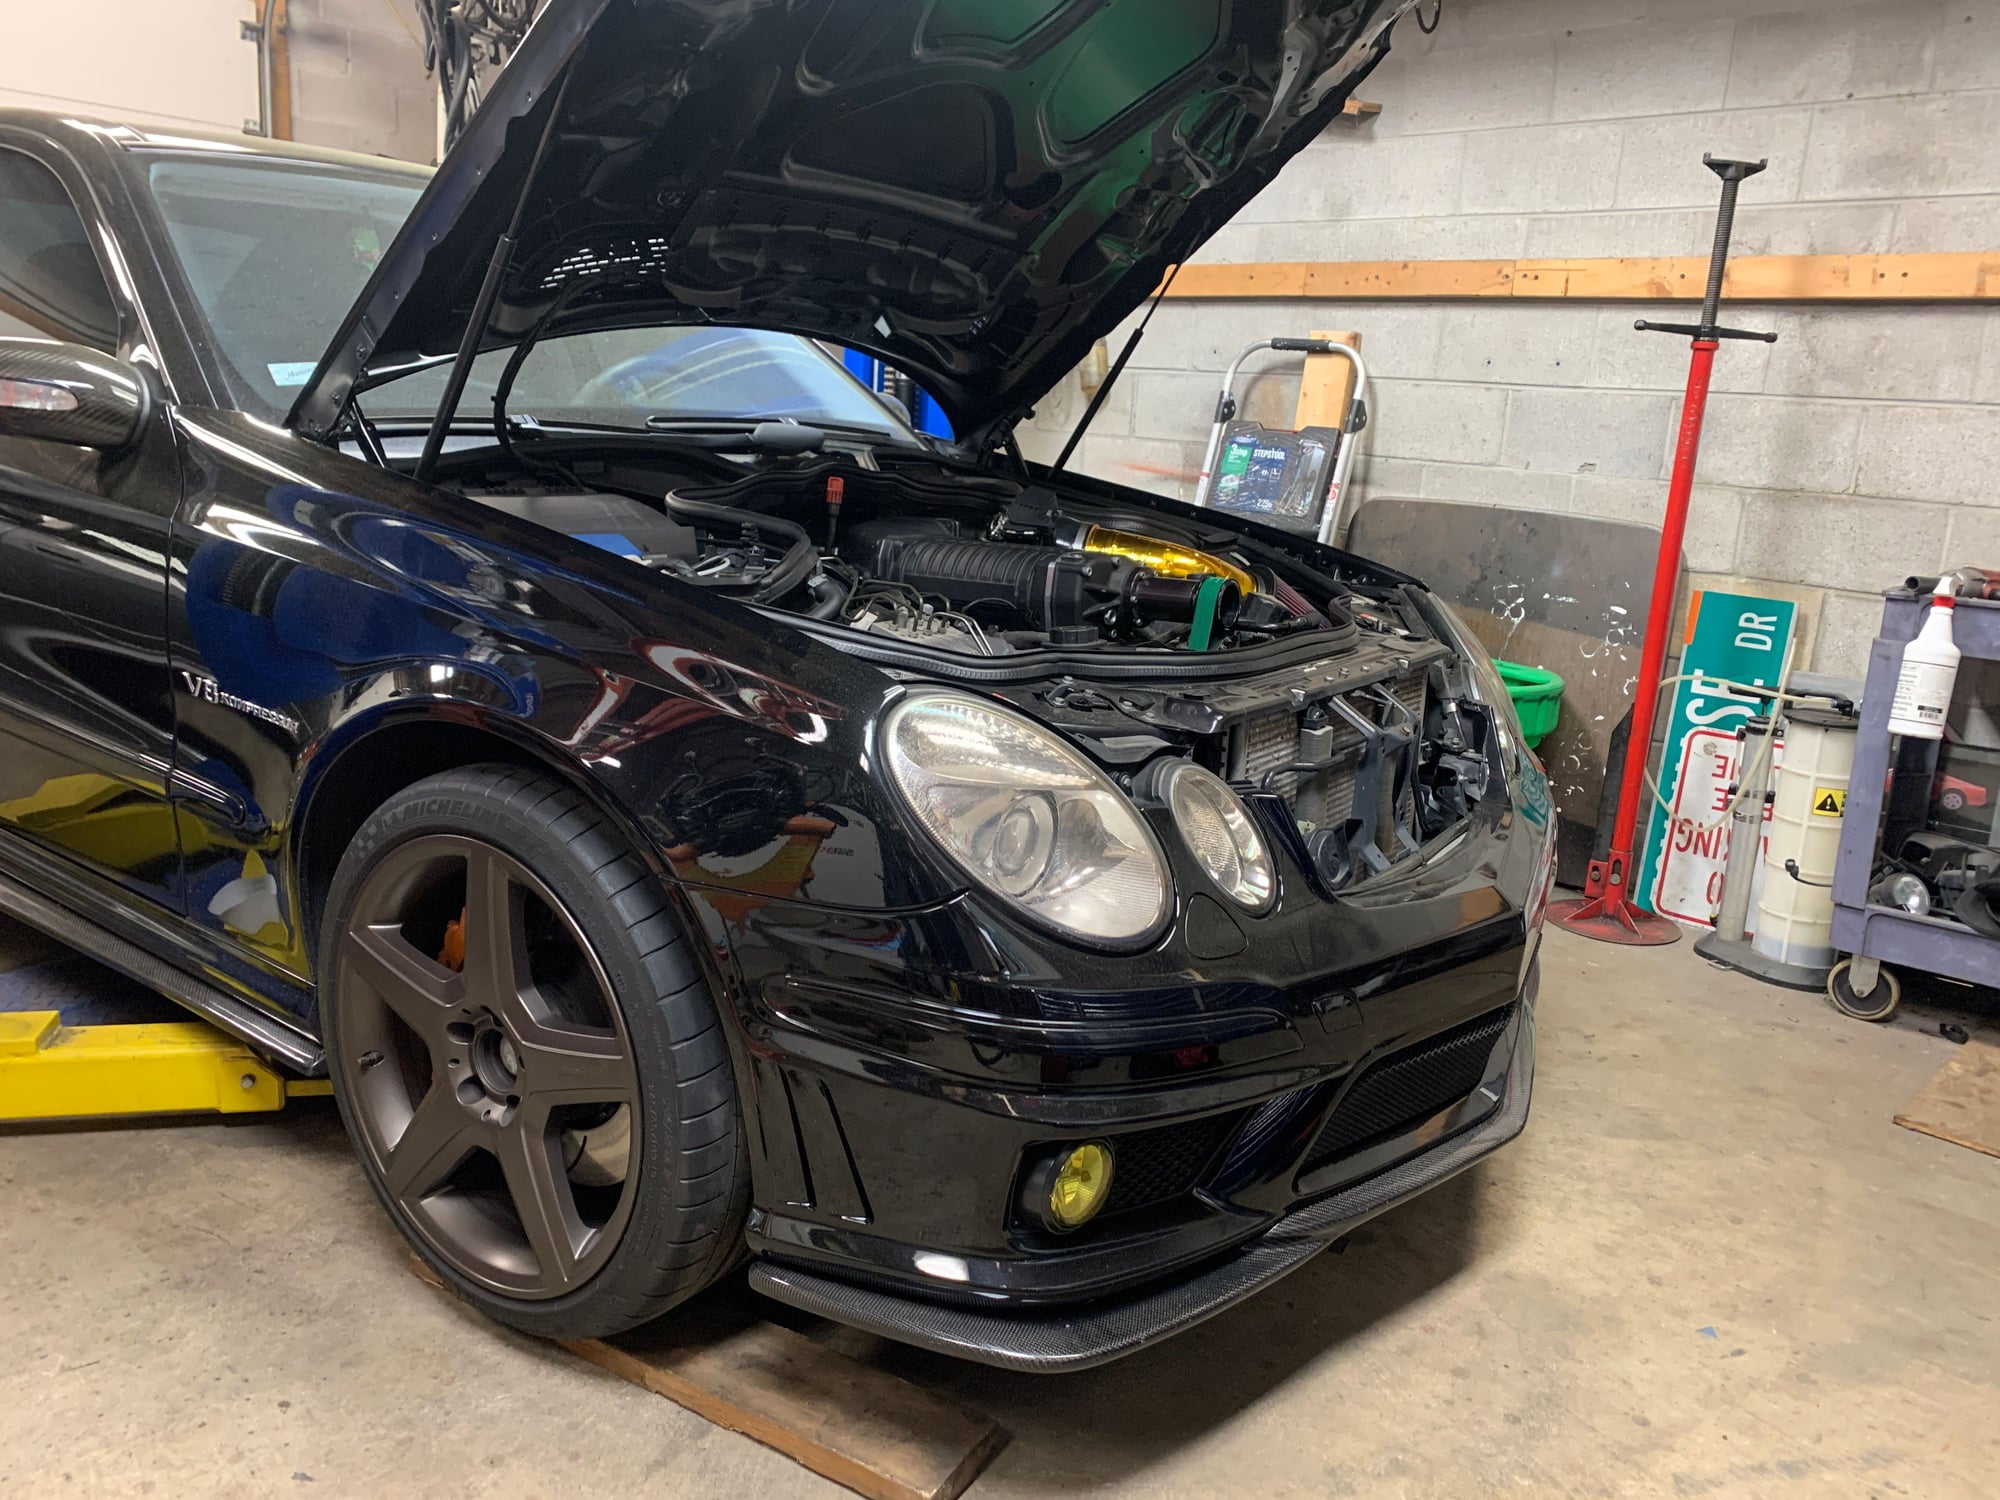 2005 Mercedes-Benz E55 AMG - 2005 E55 AMG Weistec Supercharged. 700whp/860wtq! Record setting! 70k miles - Used - VIN Wdbuf76j55a768758 - 70,400 Miles - 8 cyl - 2WD - Automatic - Sedan - Black - Catonsville, MD 21228, United States